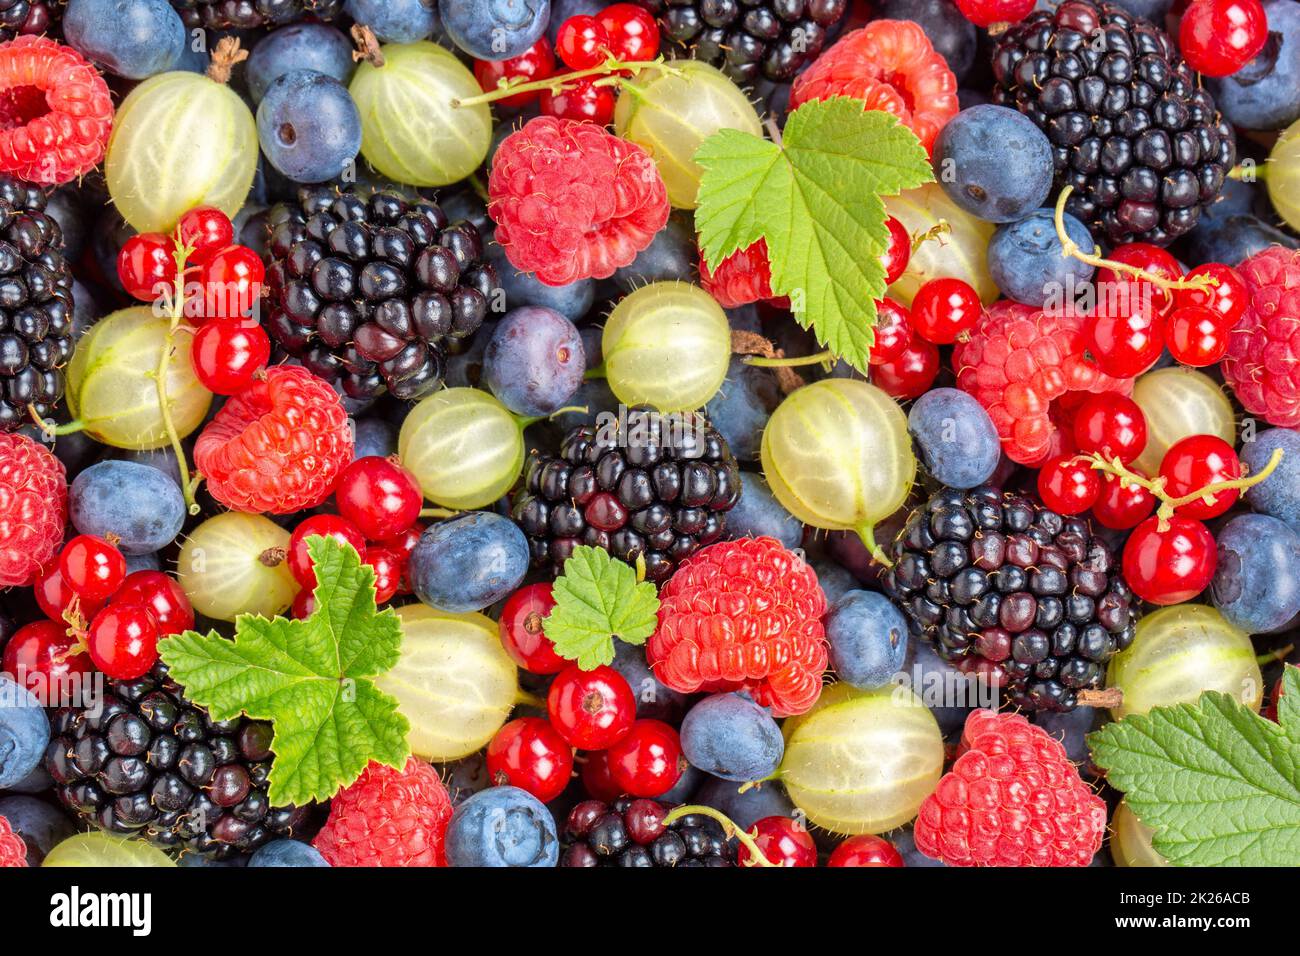 Berries fruits berry fruit strawberries strawberry blueberries blueberry from above Stock Photo